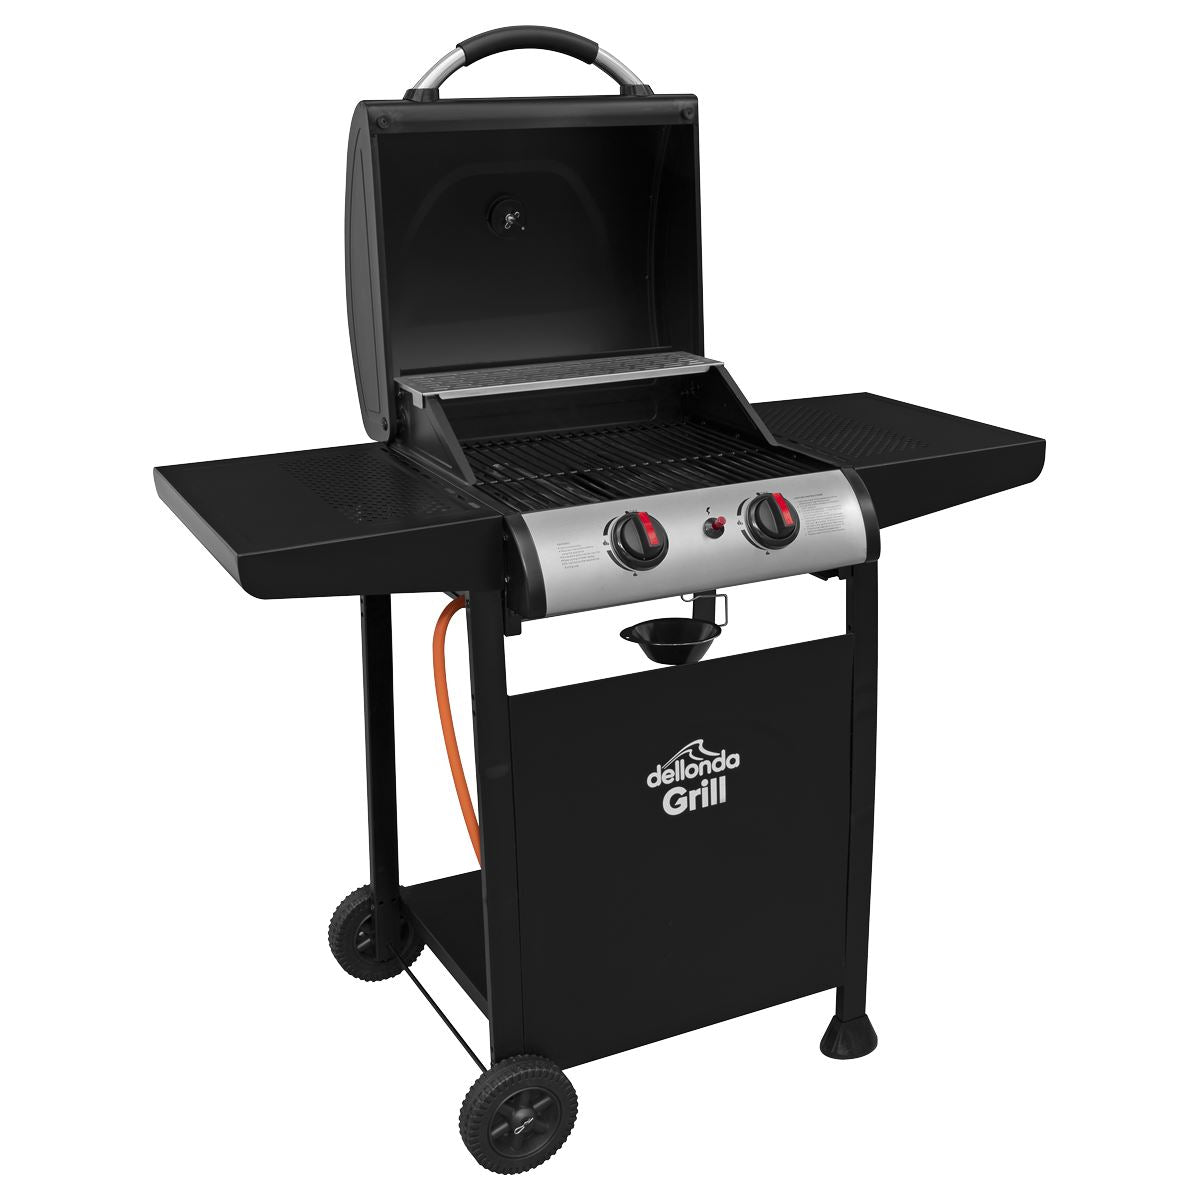 Dellonda 2 Burner Gas BBQ Grill with Ignition & Thermometer - Black/Stainless Steel